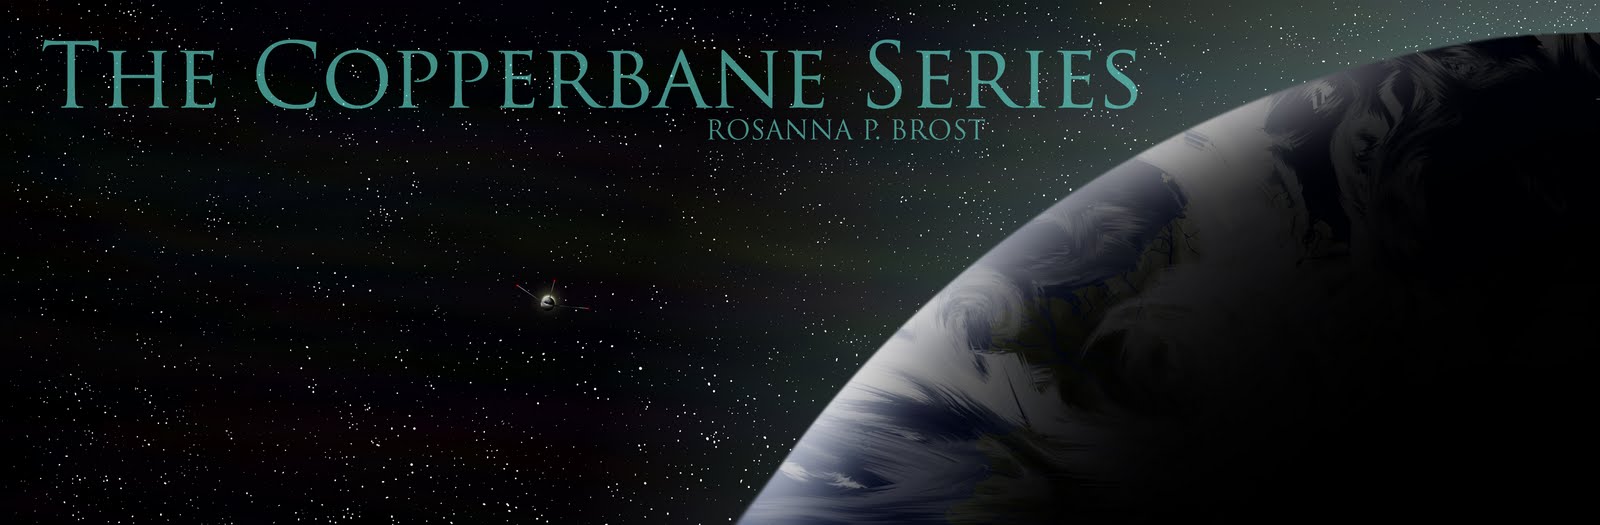 The Copperbane Series - Excerpts